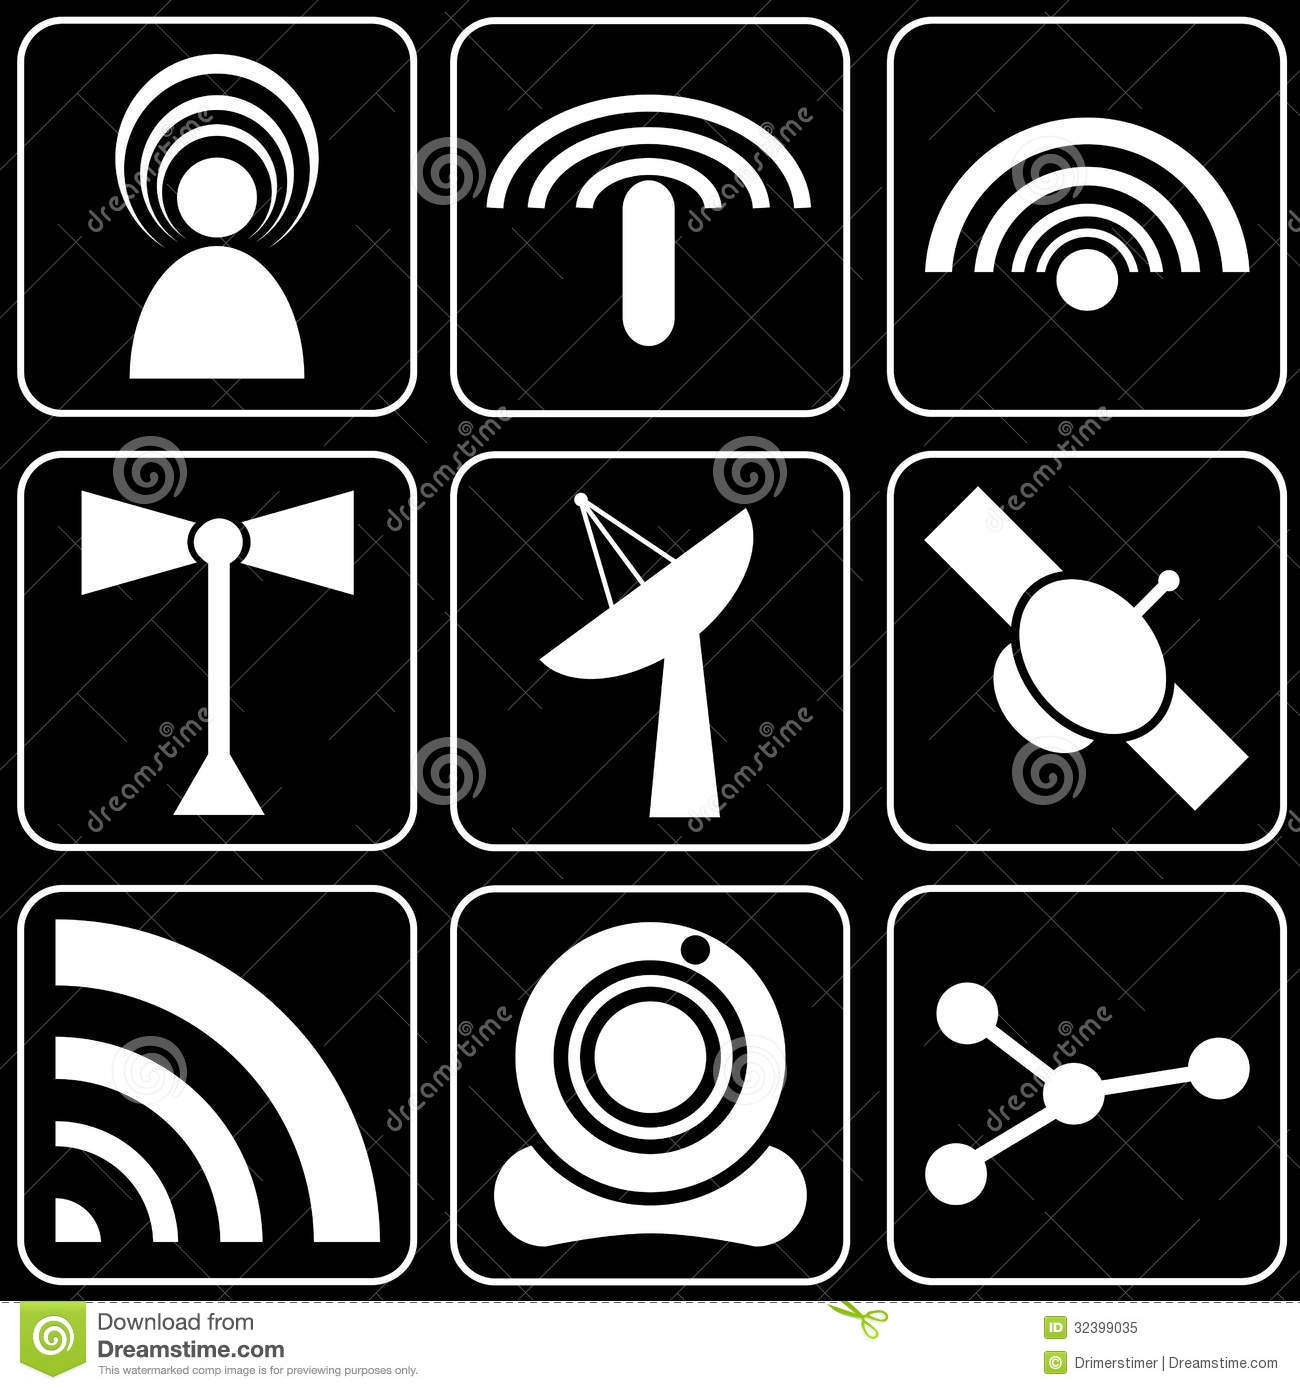 Technology Icons Black and White